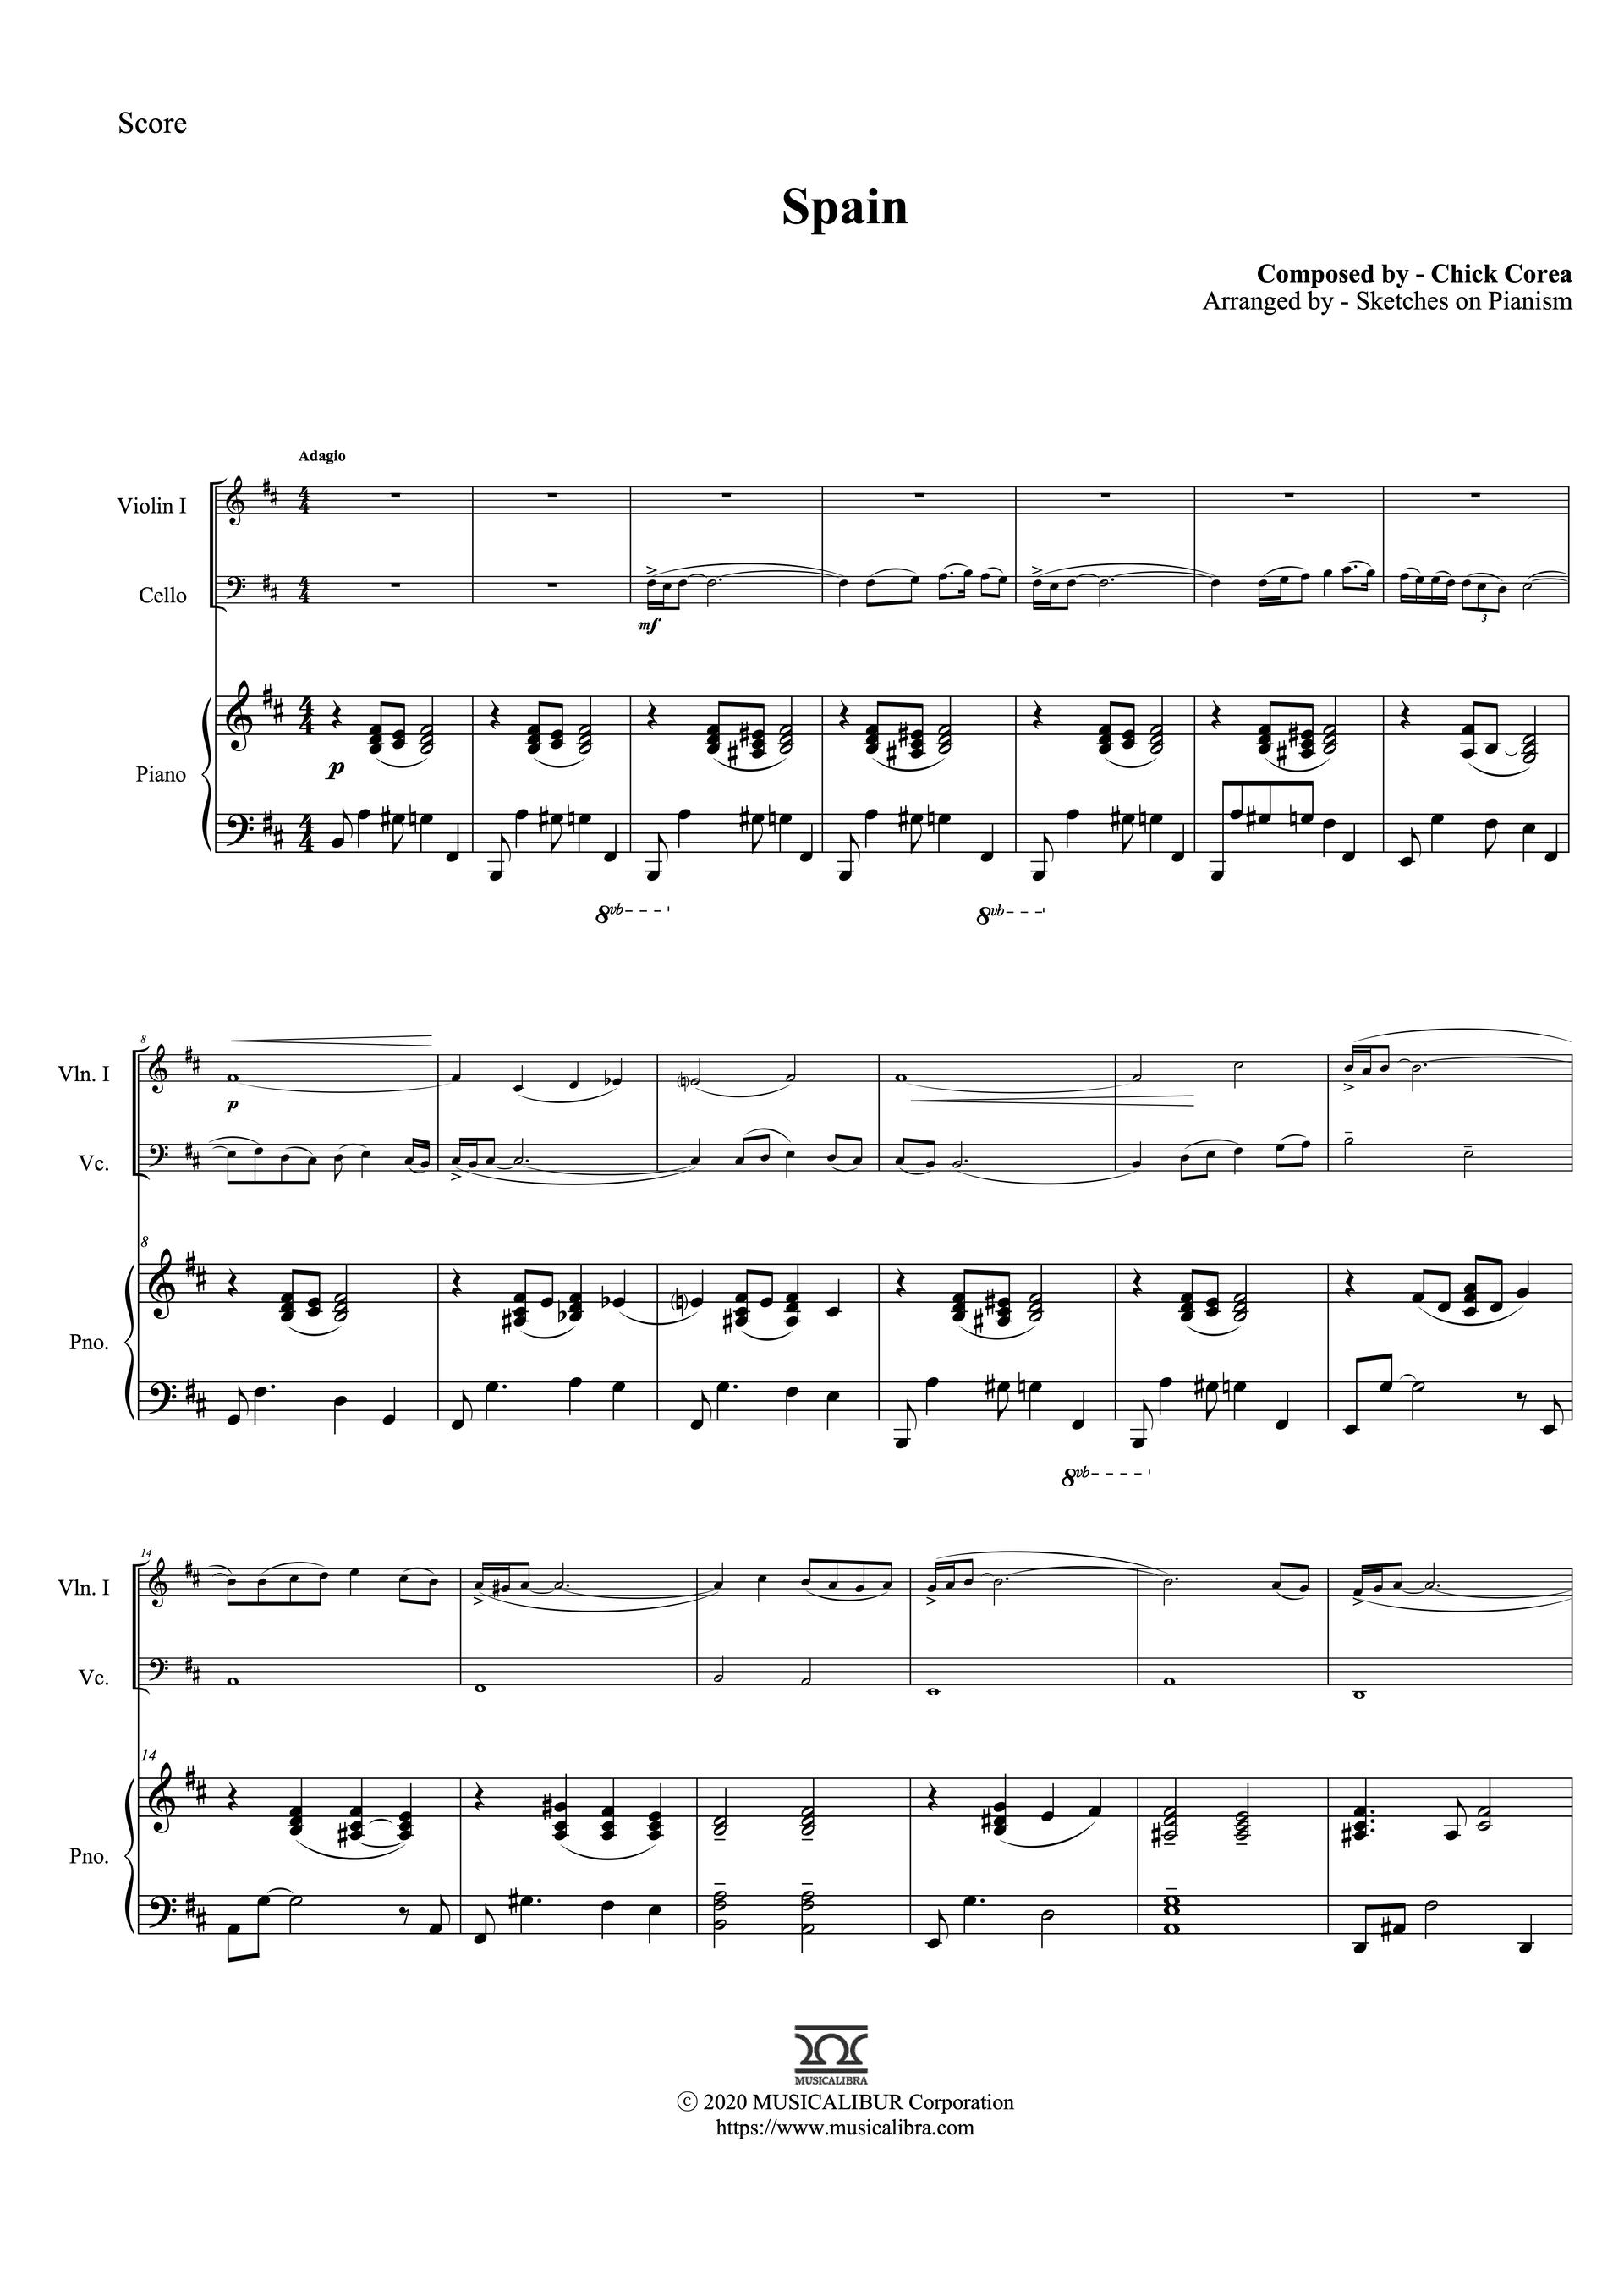 Sheet music of Chick Corea's Spain arranged for violin, cello and piano trio chamber ensemble preview page 1